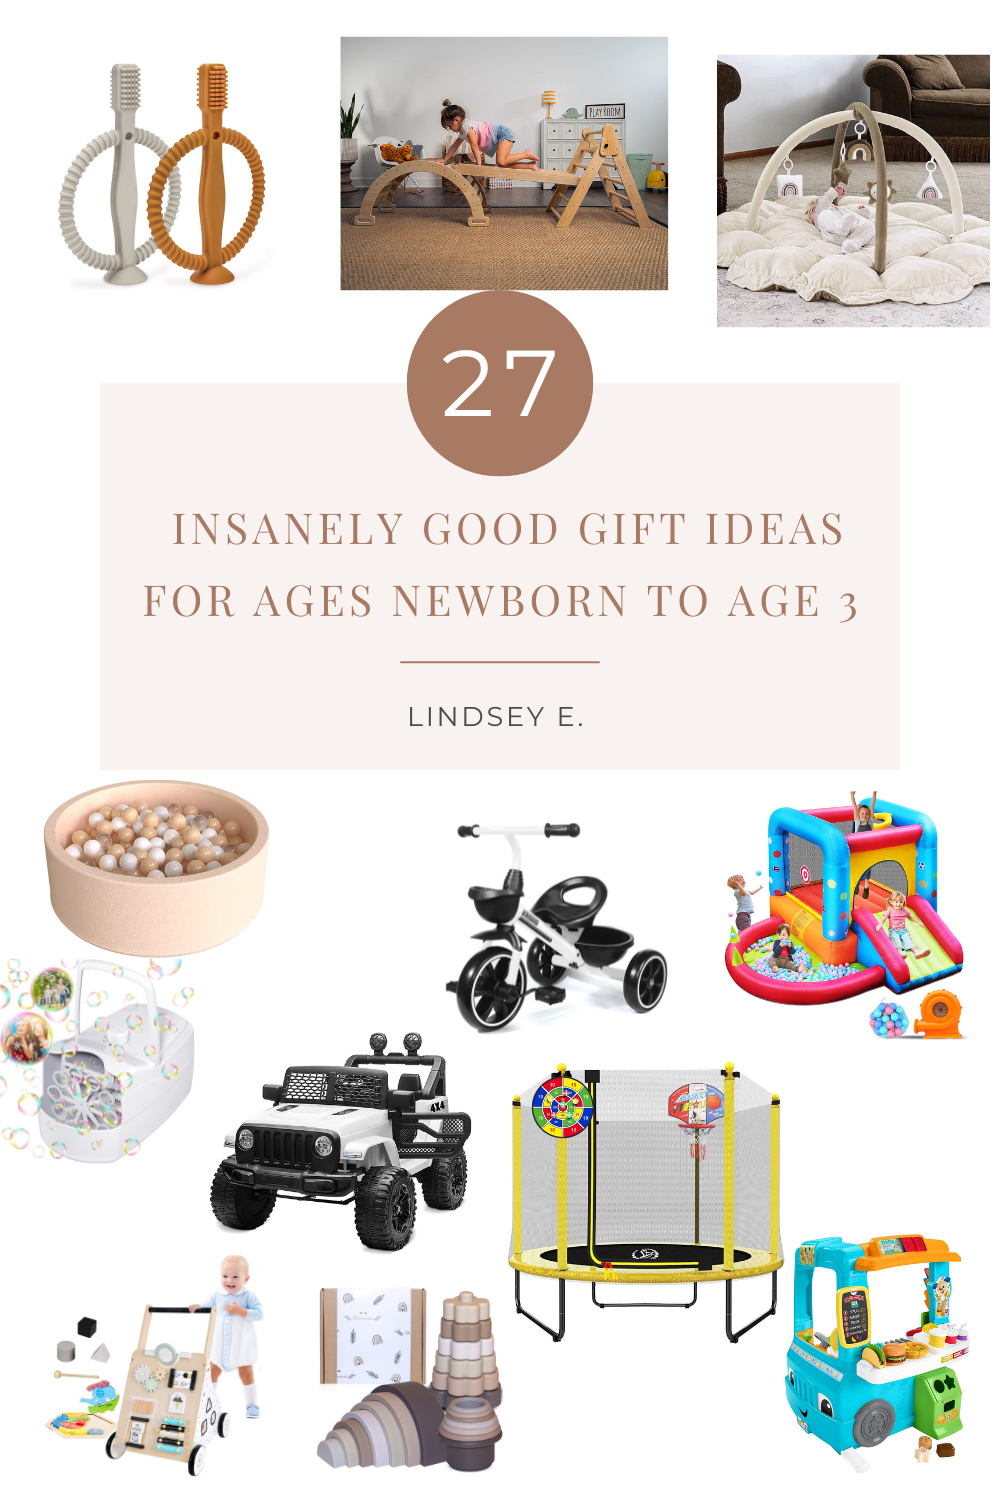 27 Insanely Good Gift Ideas for Ages Newborn to Age 3